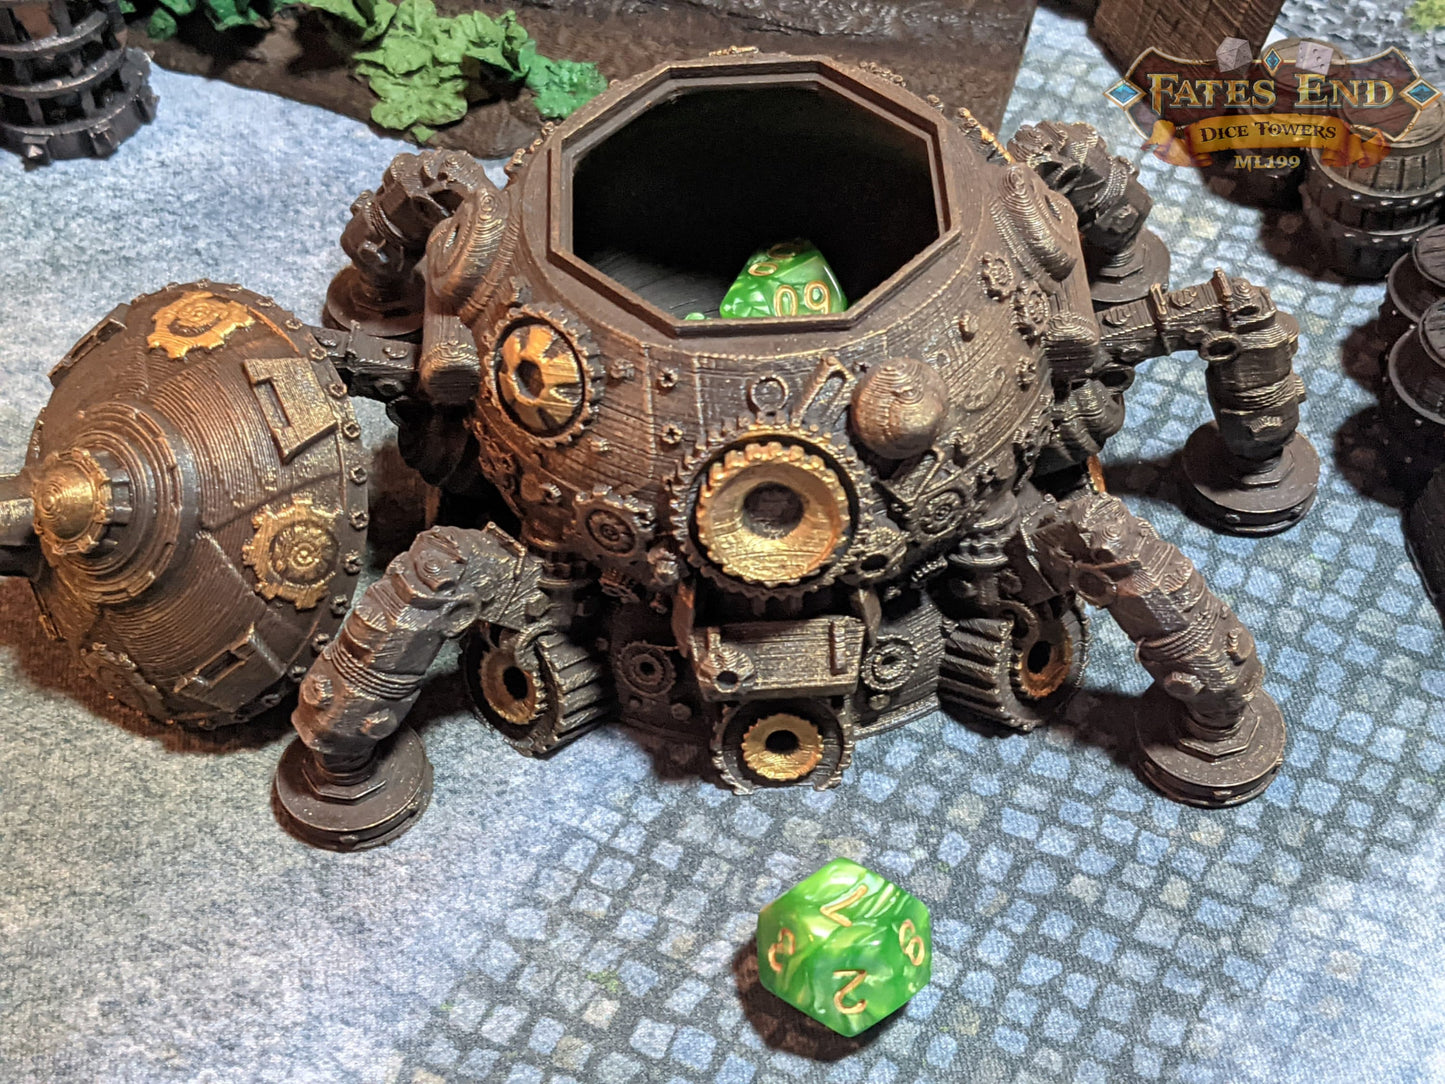 Octo-Tank Steampunk 3D Printed Dice Box/Dice Jail/Dice Vault - Fate's End Collection - Tabletop RPG Cosplay- Industrial Elegance & Precision